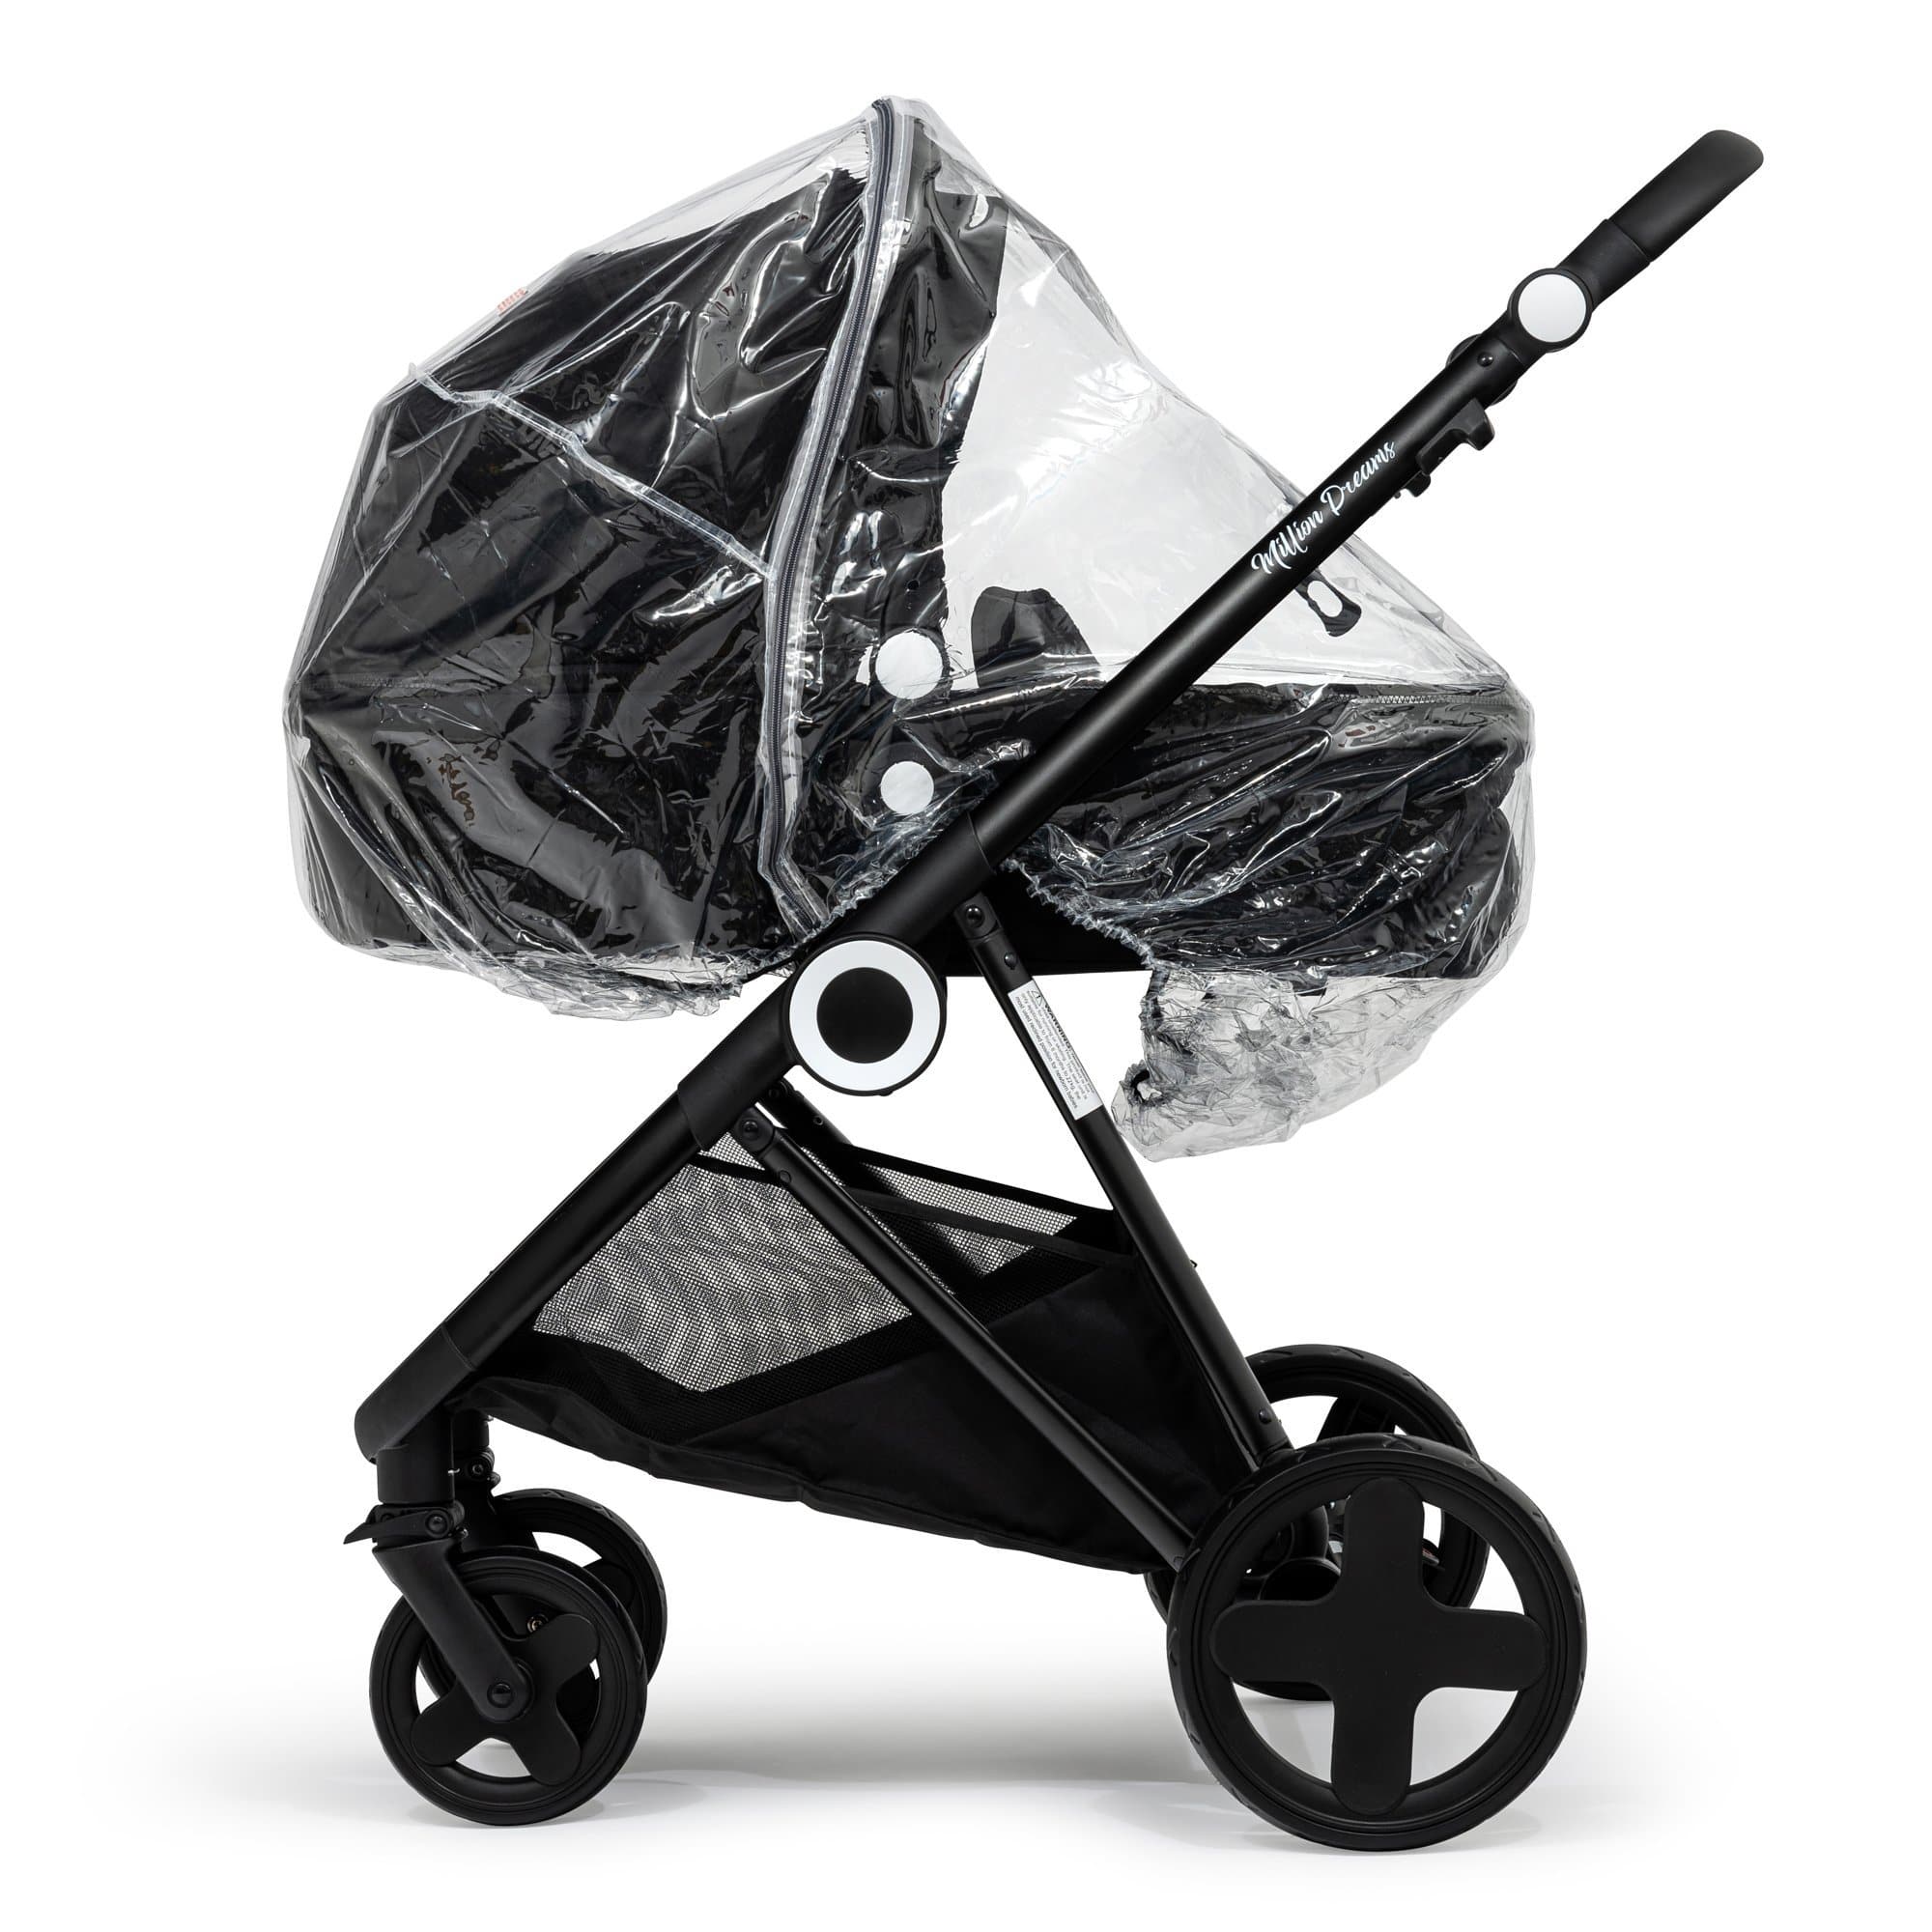 2 in 1 Rain Cover Compatible with Hesba - Fits All Models - For Your Little One